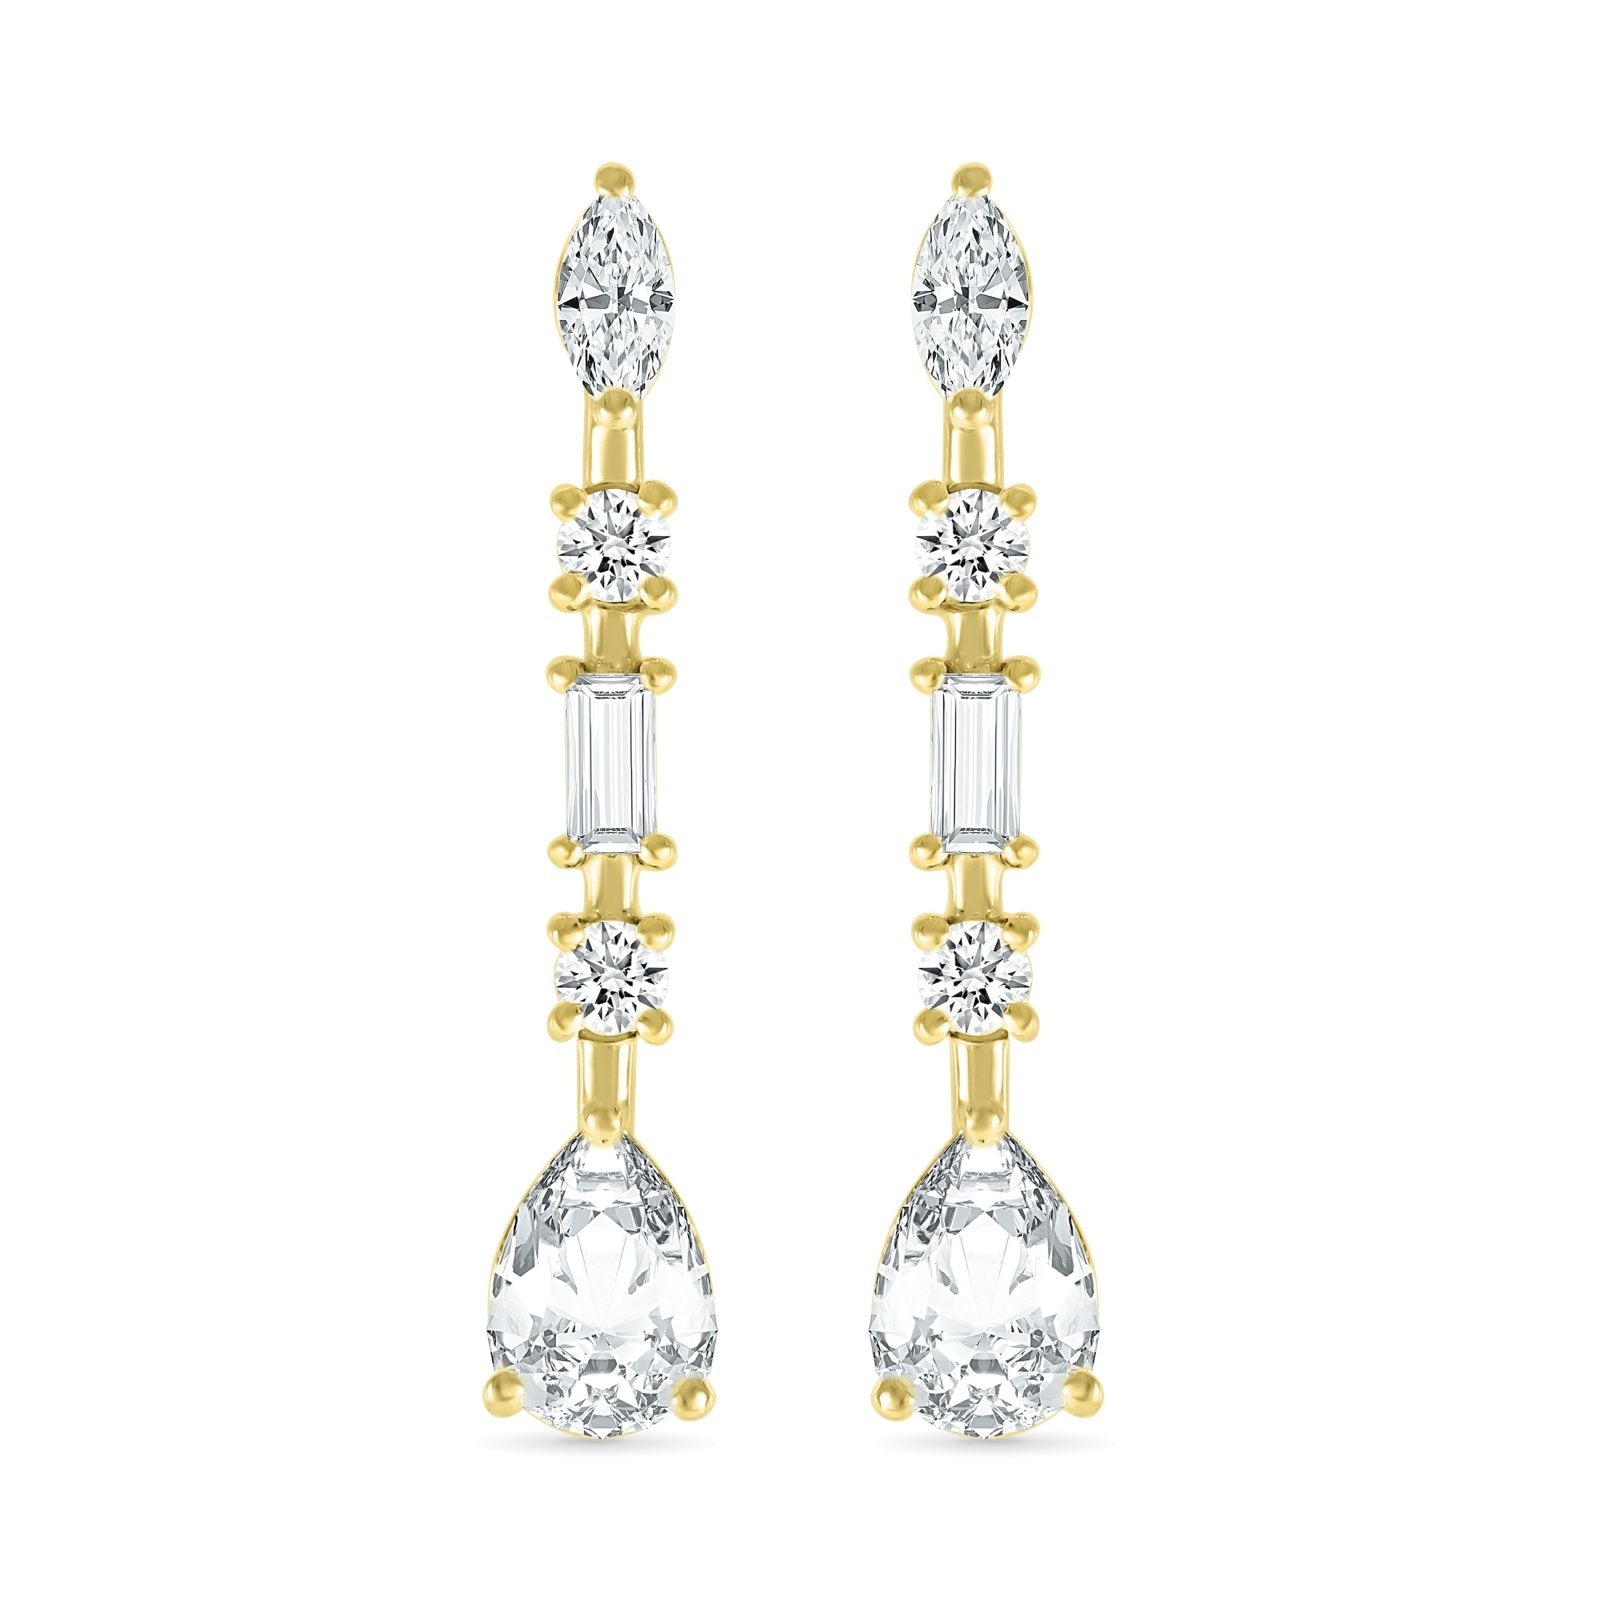 Mixed Shape White Sapphire Dangle Earrings Earrings Estella Collection 32684 Made to Order White Sapphire Yellow Gold #tag4# #tag5# #tag6# #tag7# #tag8# #tag9# #tag10#